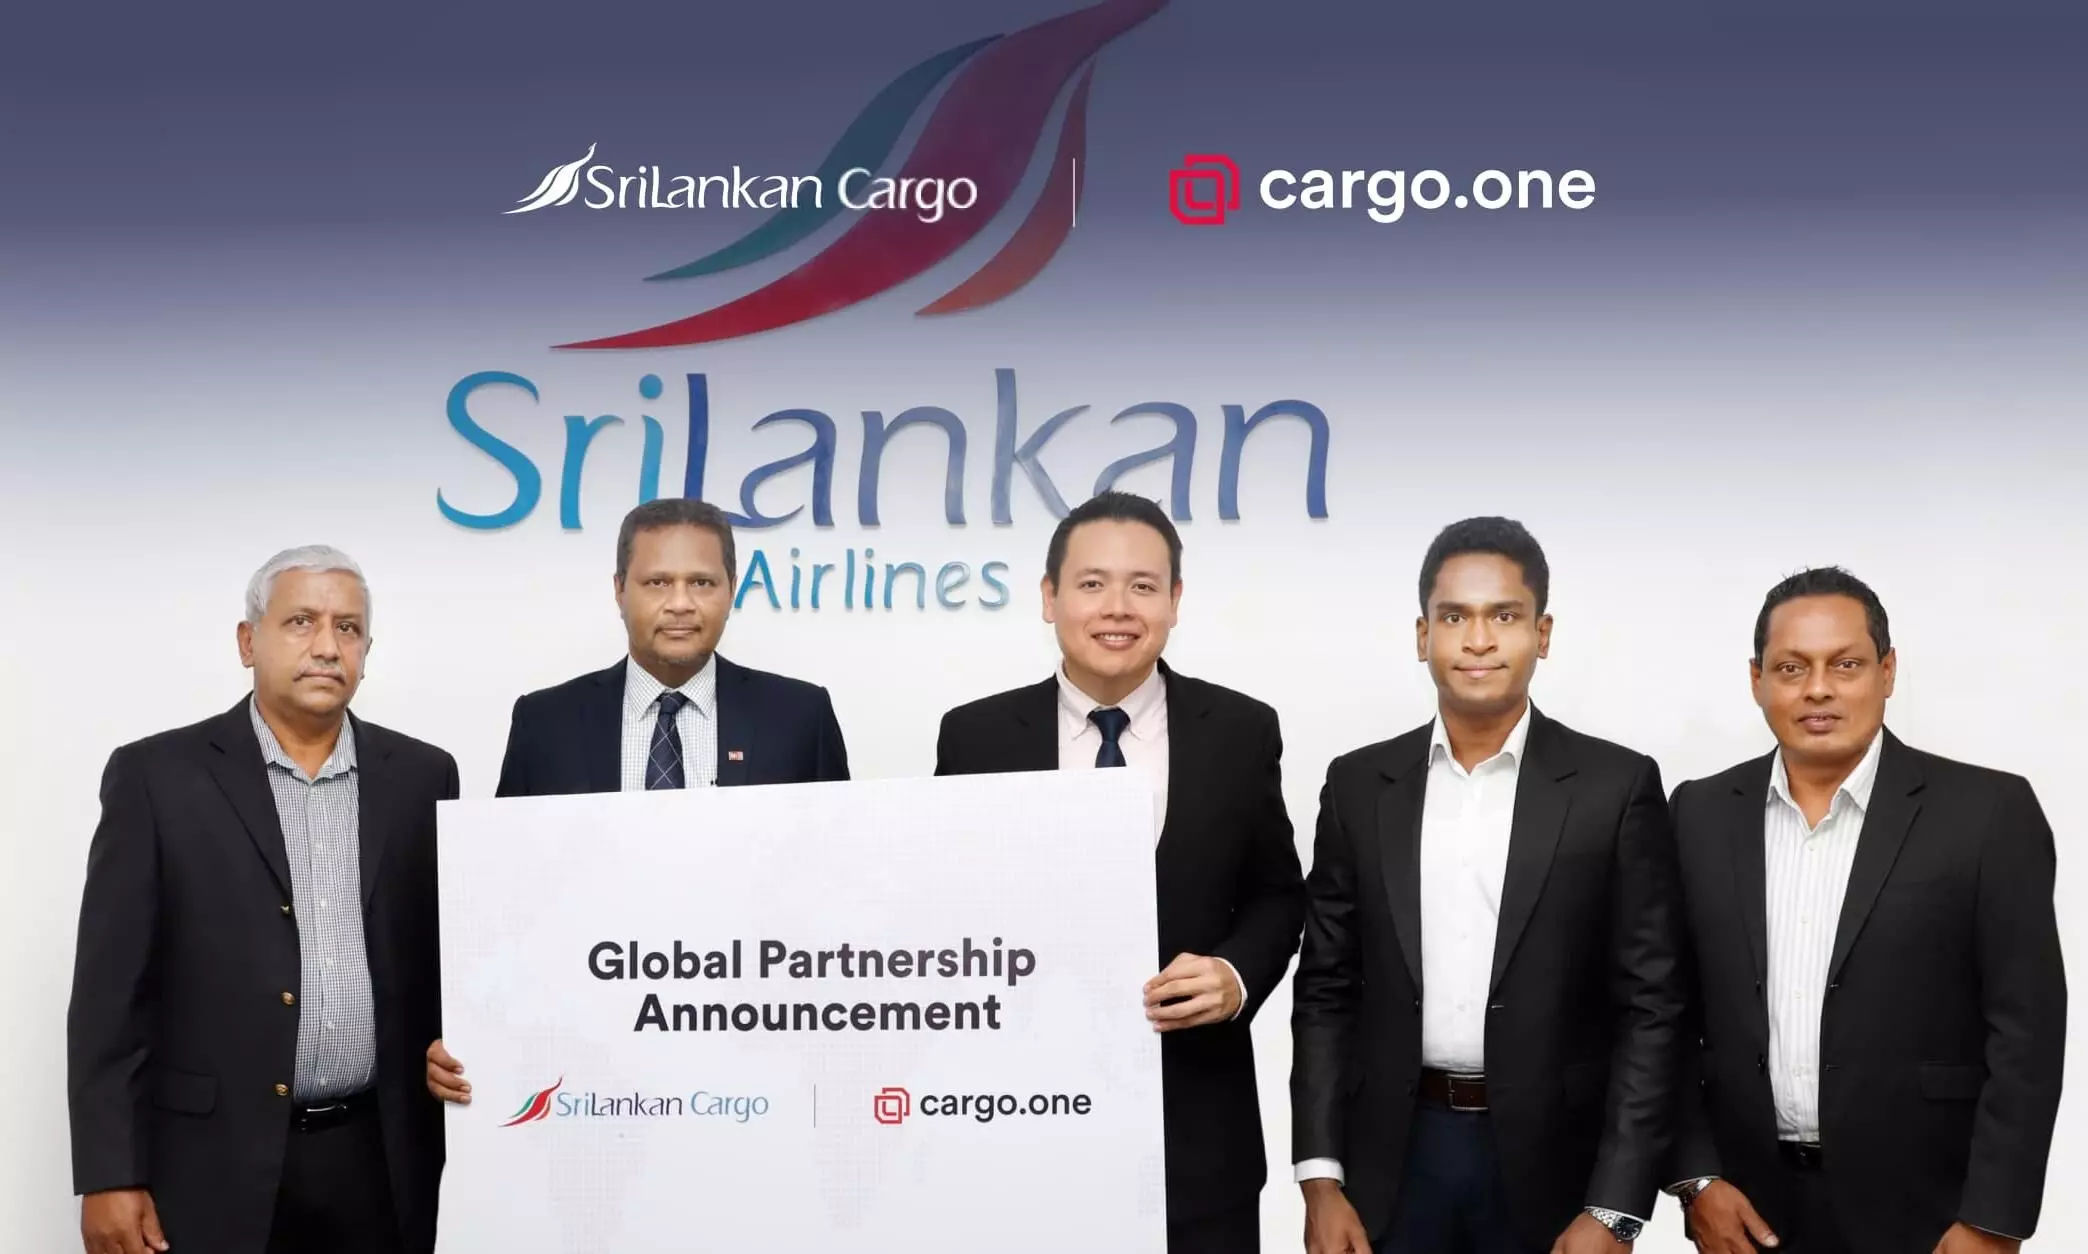 SriLankan Cargo partners with cargo.one to digitalise sales